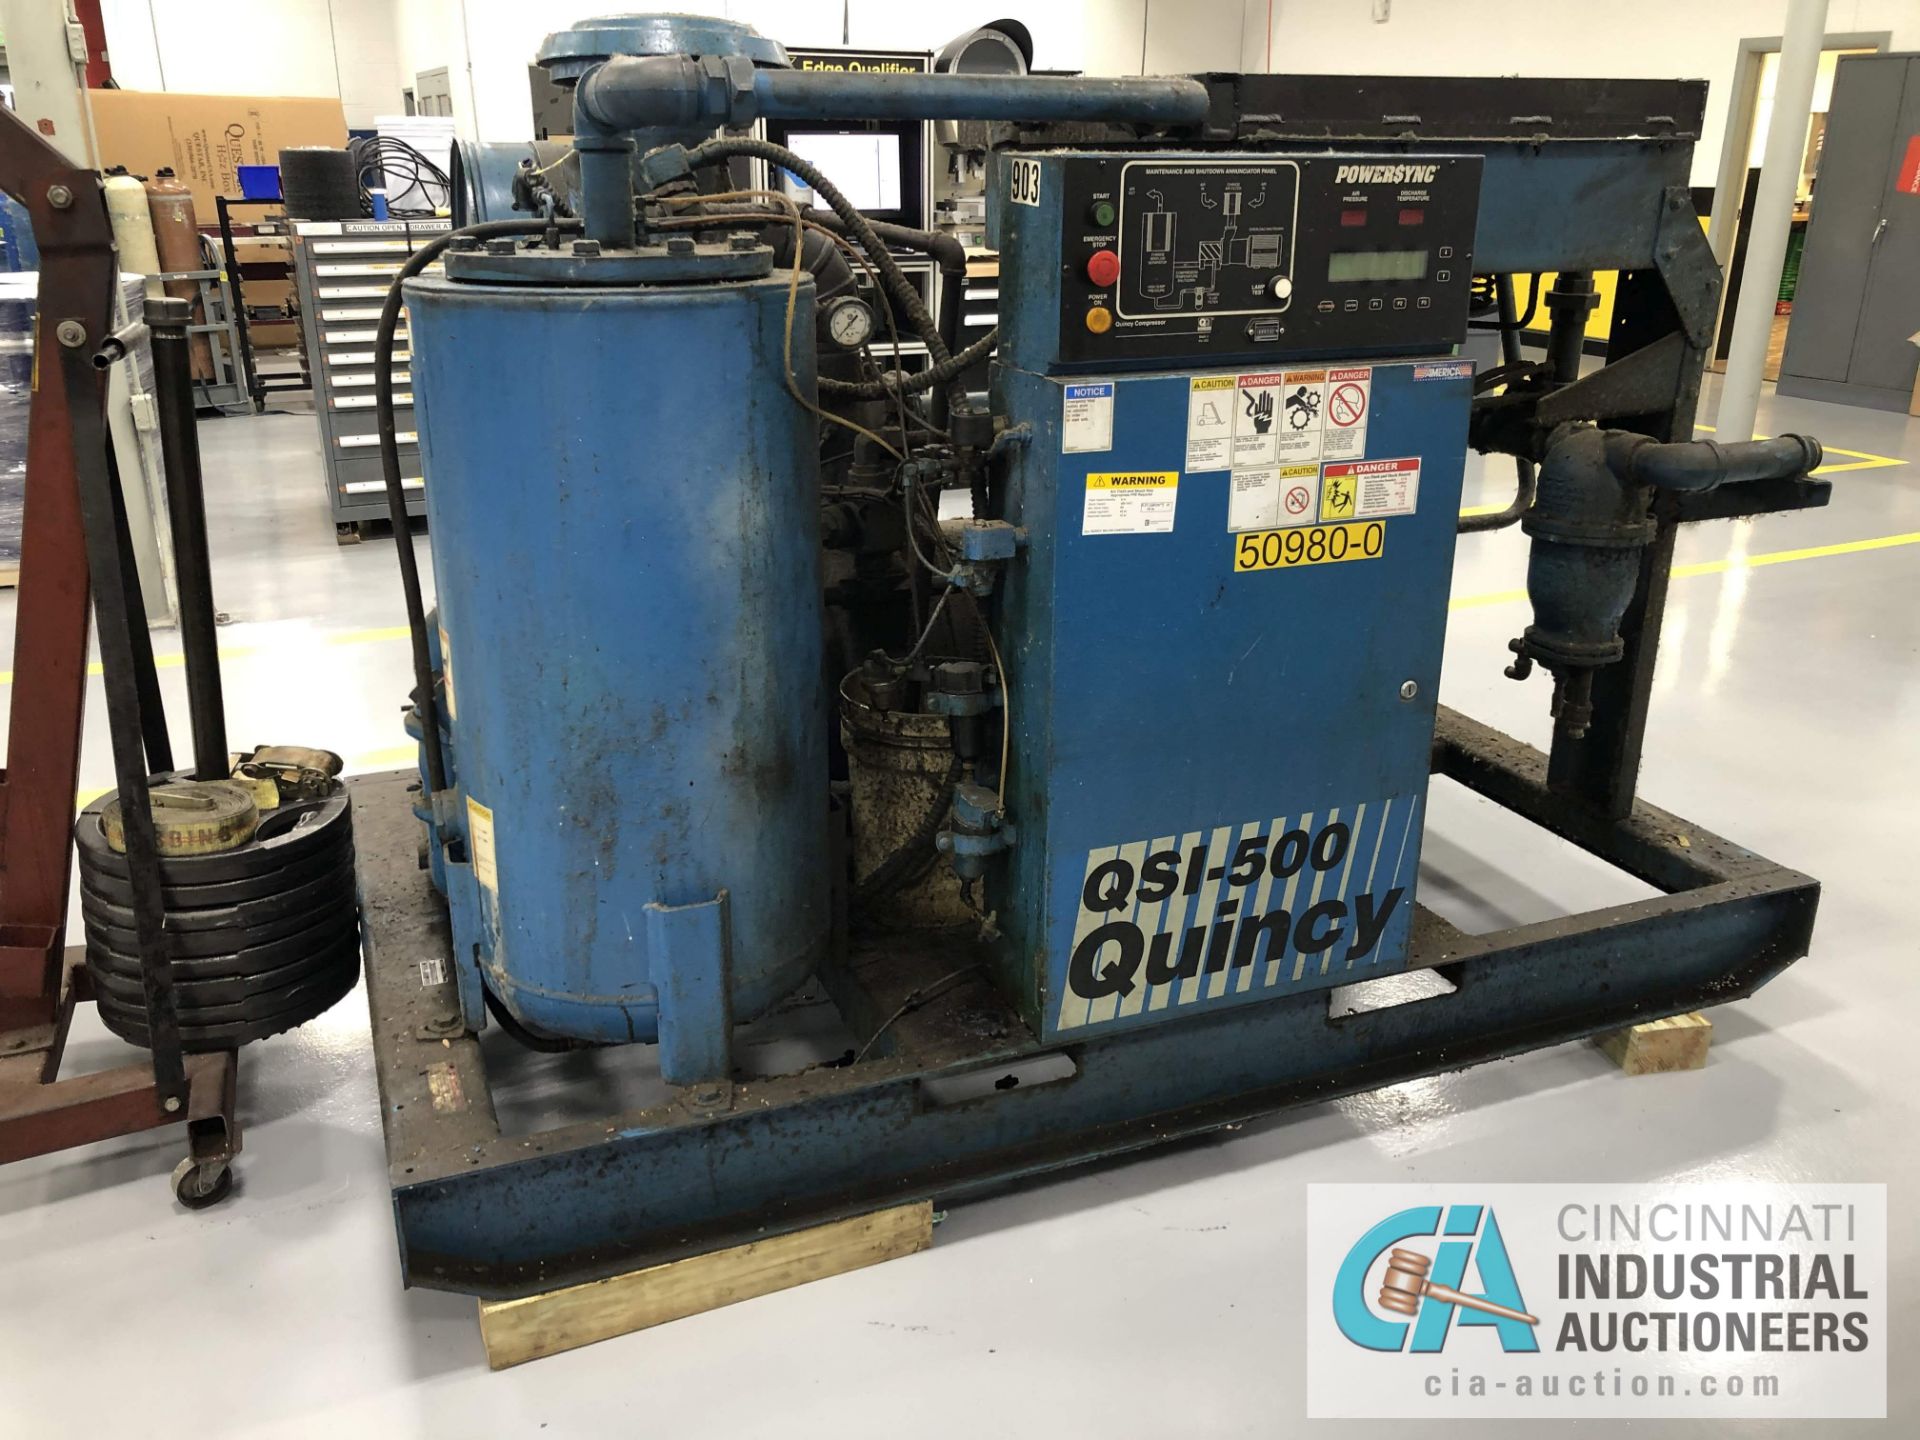 100 HP QUINCY MODEL QSI500-ANA31ED ROTARY SCREW AIR COMPRESSOR - $50.00 Rigging Fee Due to Onsite